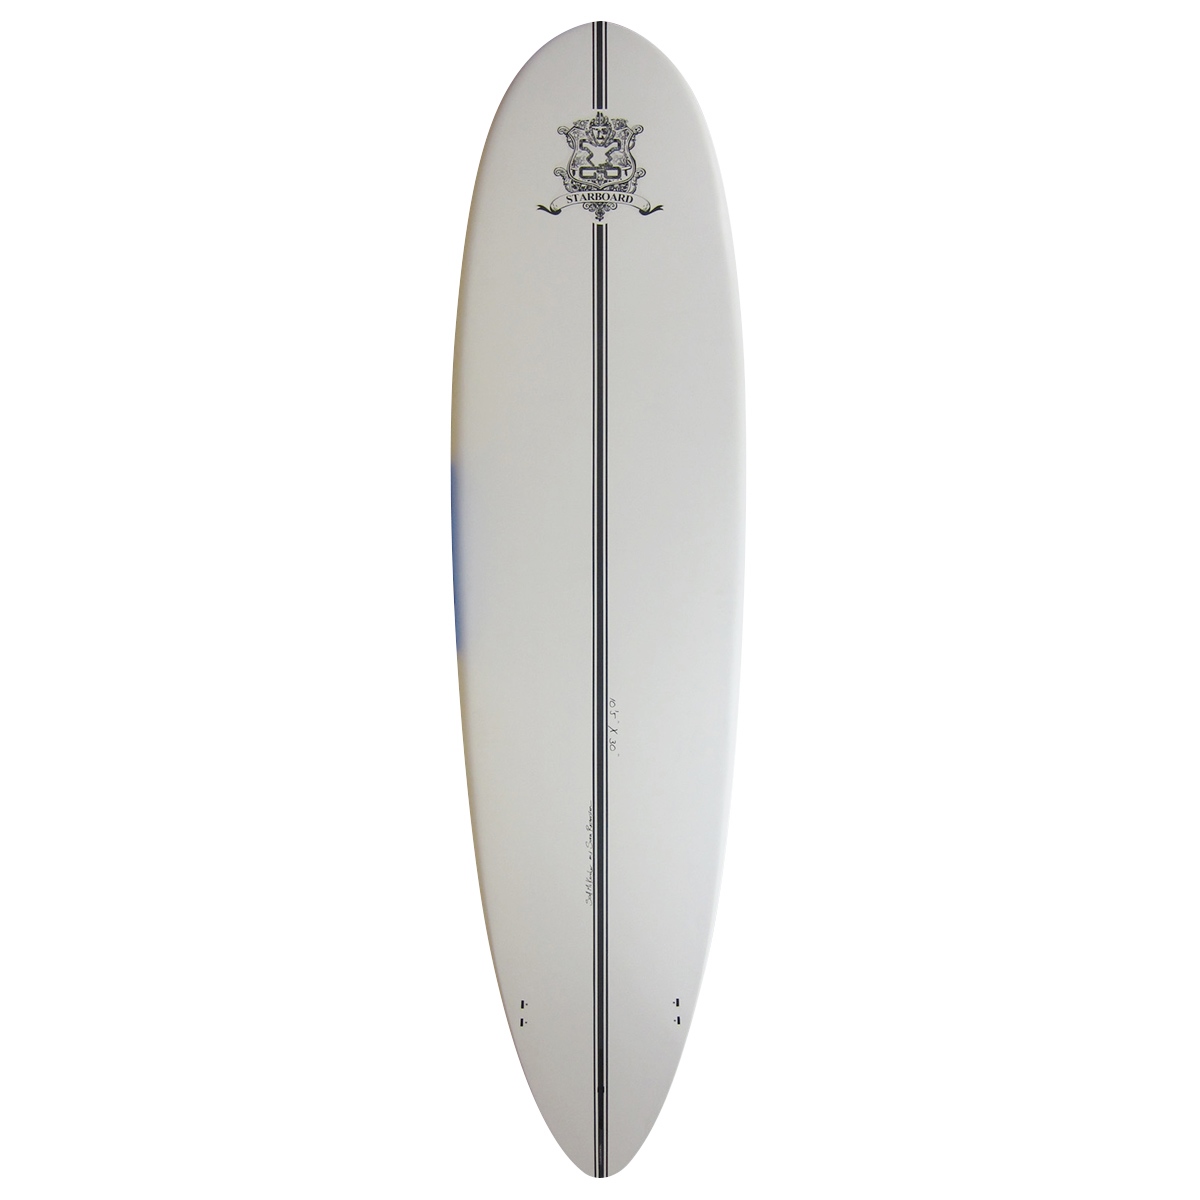  STARBOARD / 10`5 x 30 DRIVE